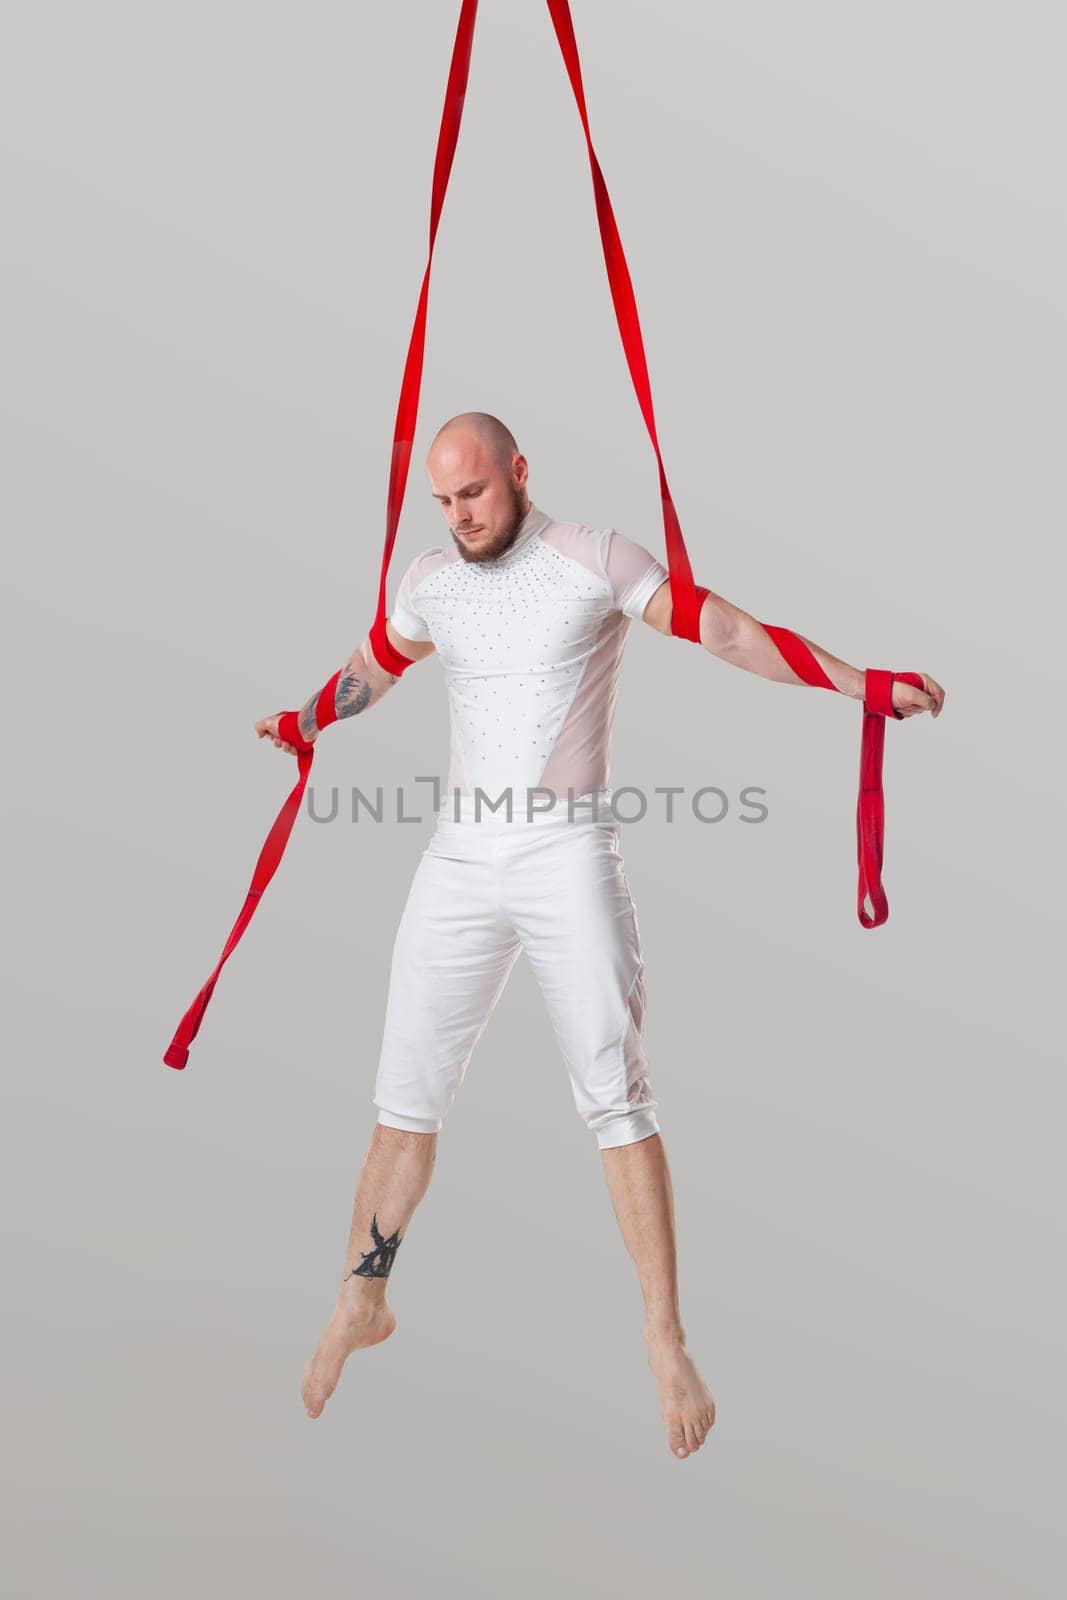 Sportsman performance on a red canvases. Bald male in a light sport suit is doing an acrobatic elements hanging on a rope and looking down in a studio isolated on white background. Dancing in the air with balance.